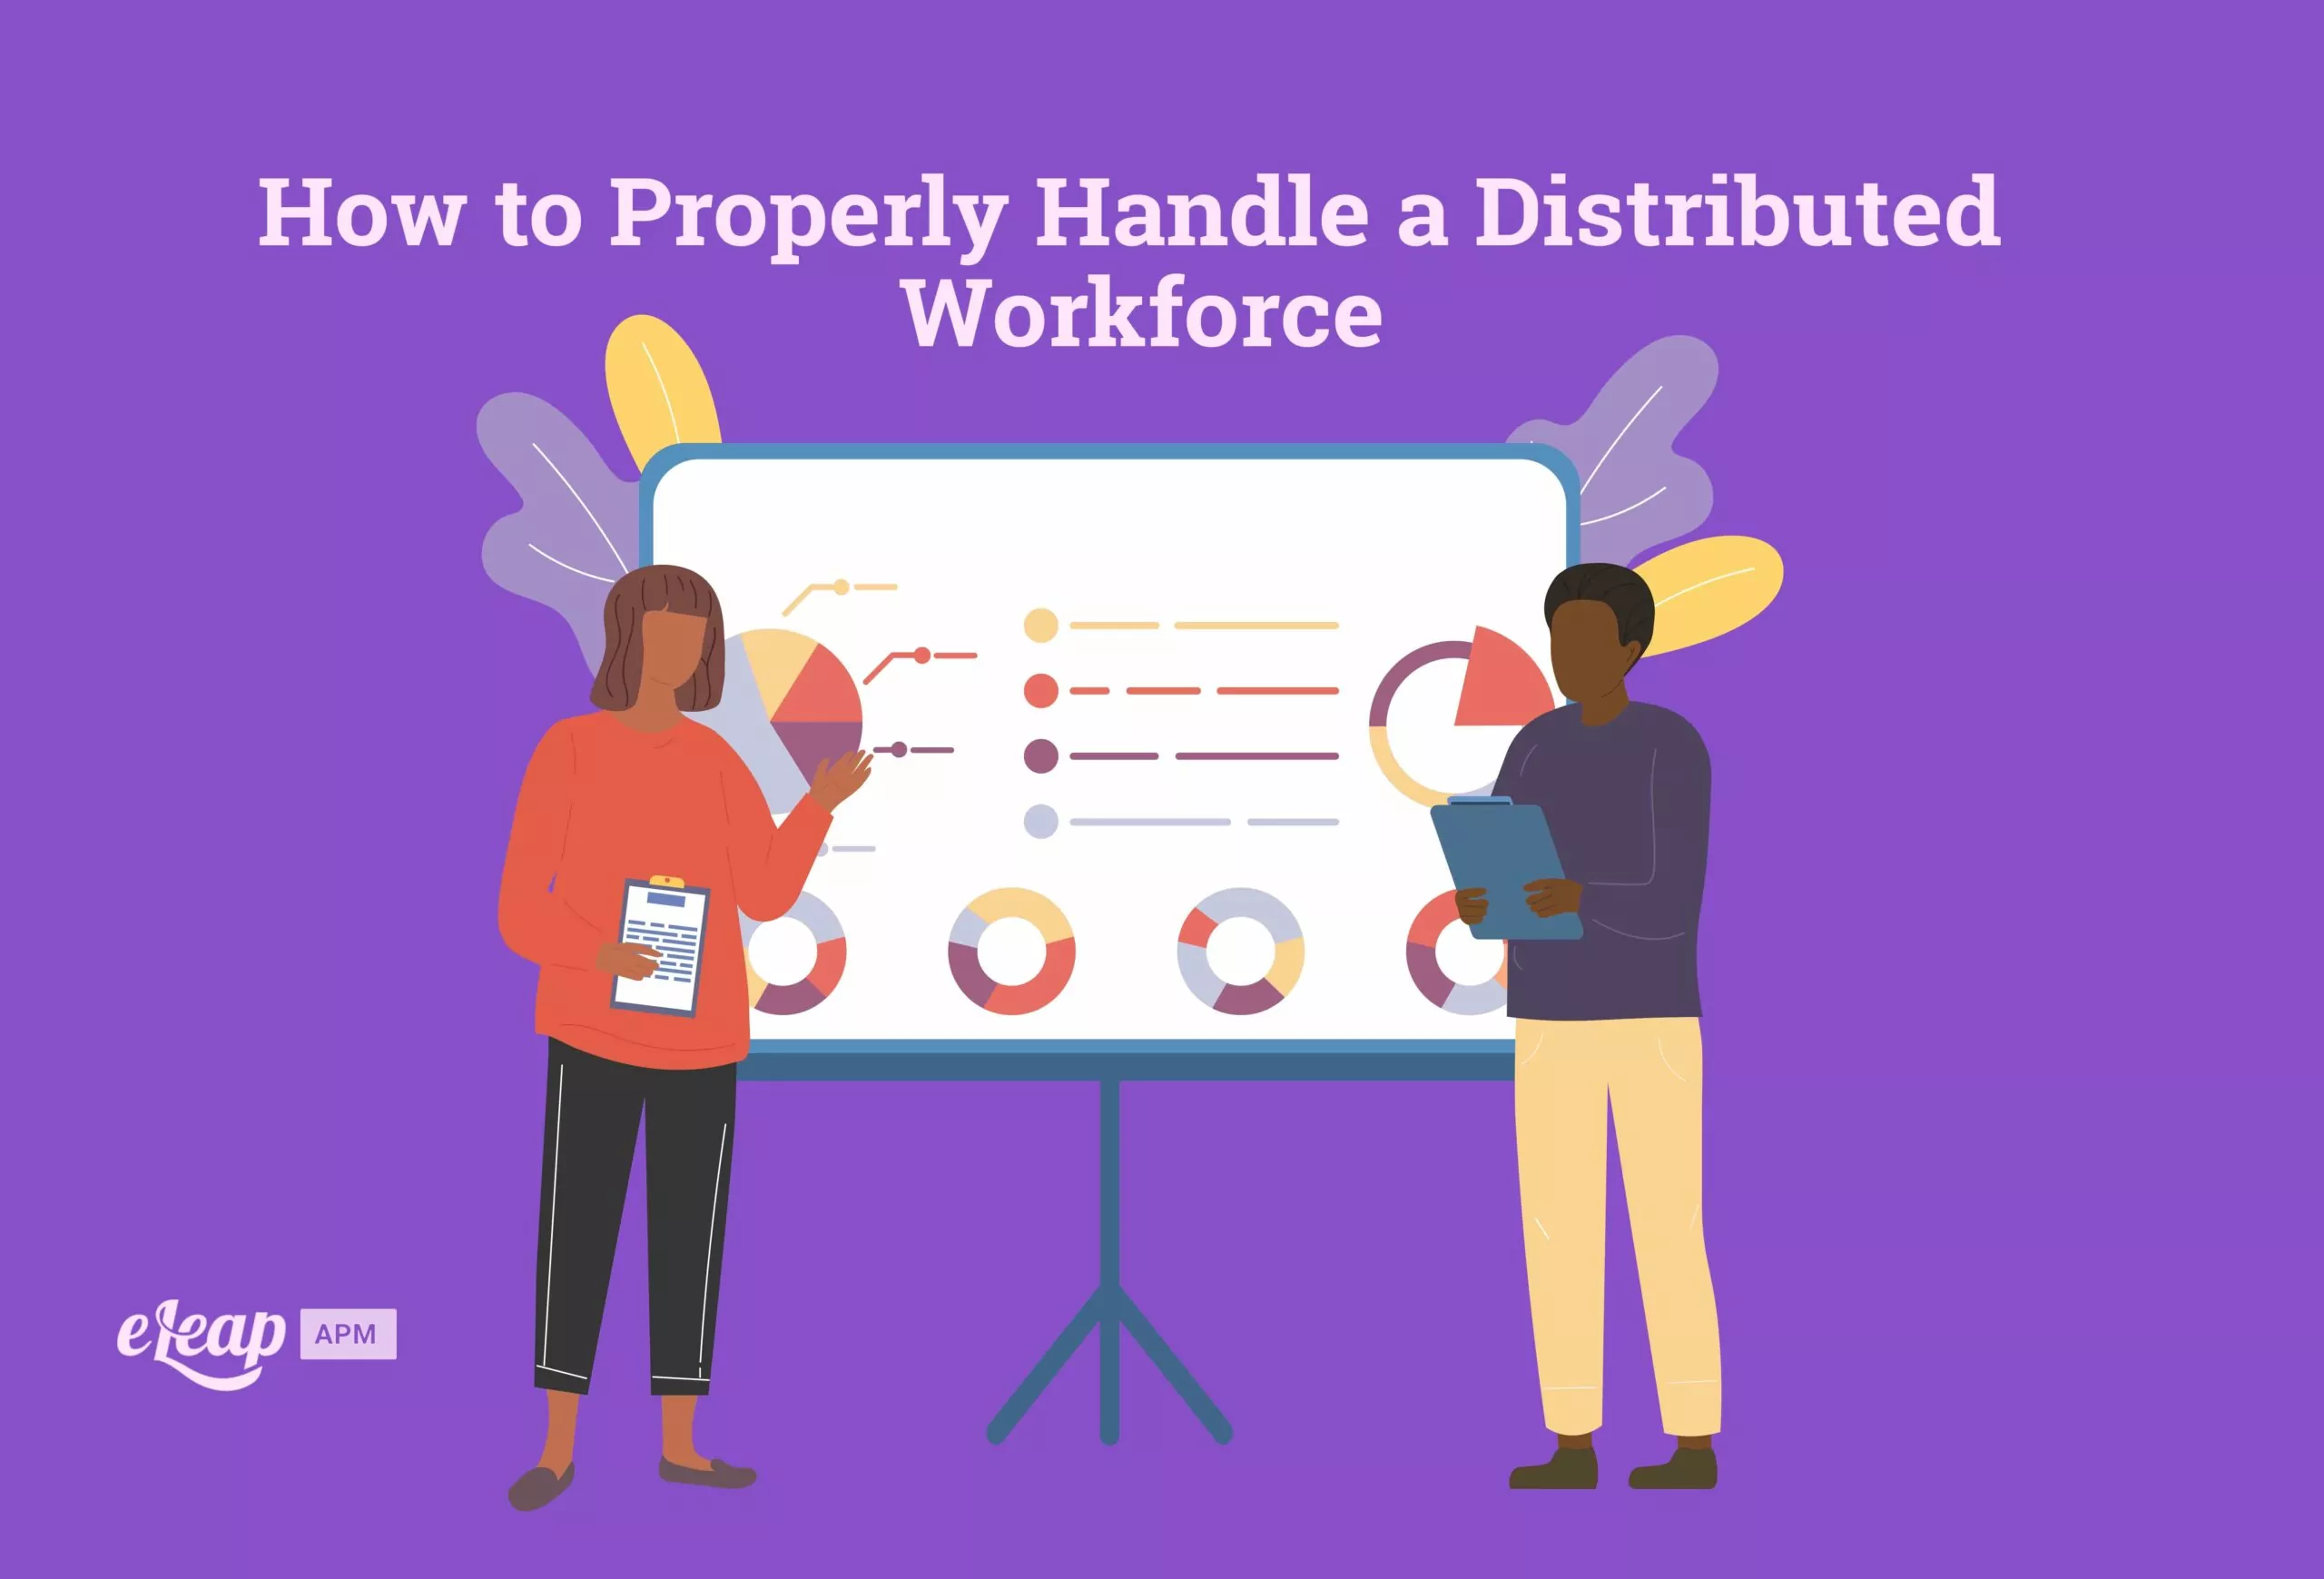 How to Properly Handle a Distributed Workforce